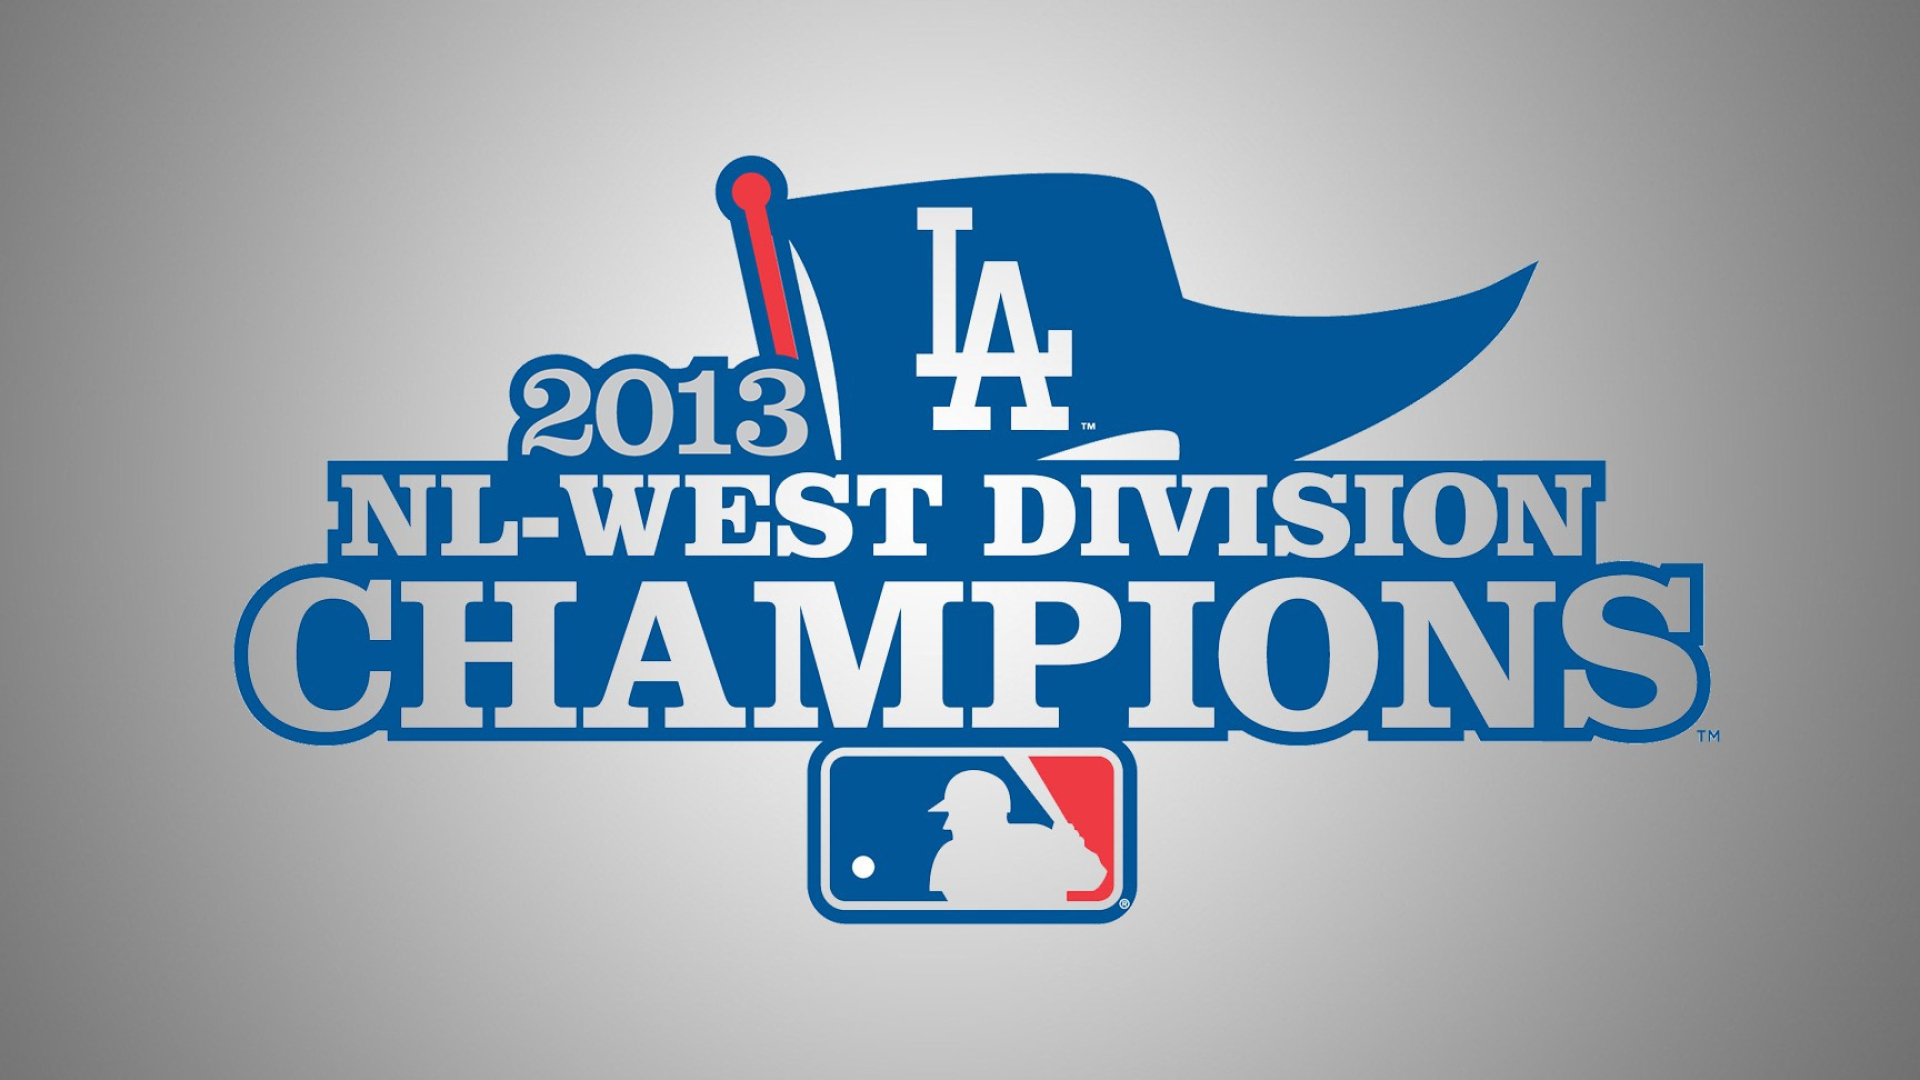 Los Angeles Dodgers, Widescreen wallpapers, Stunning visuals, Iconic franchise, 1920x1080 Full HD Desktop